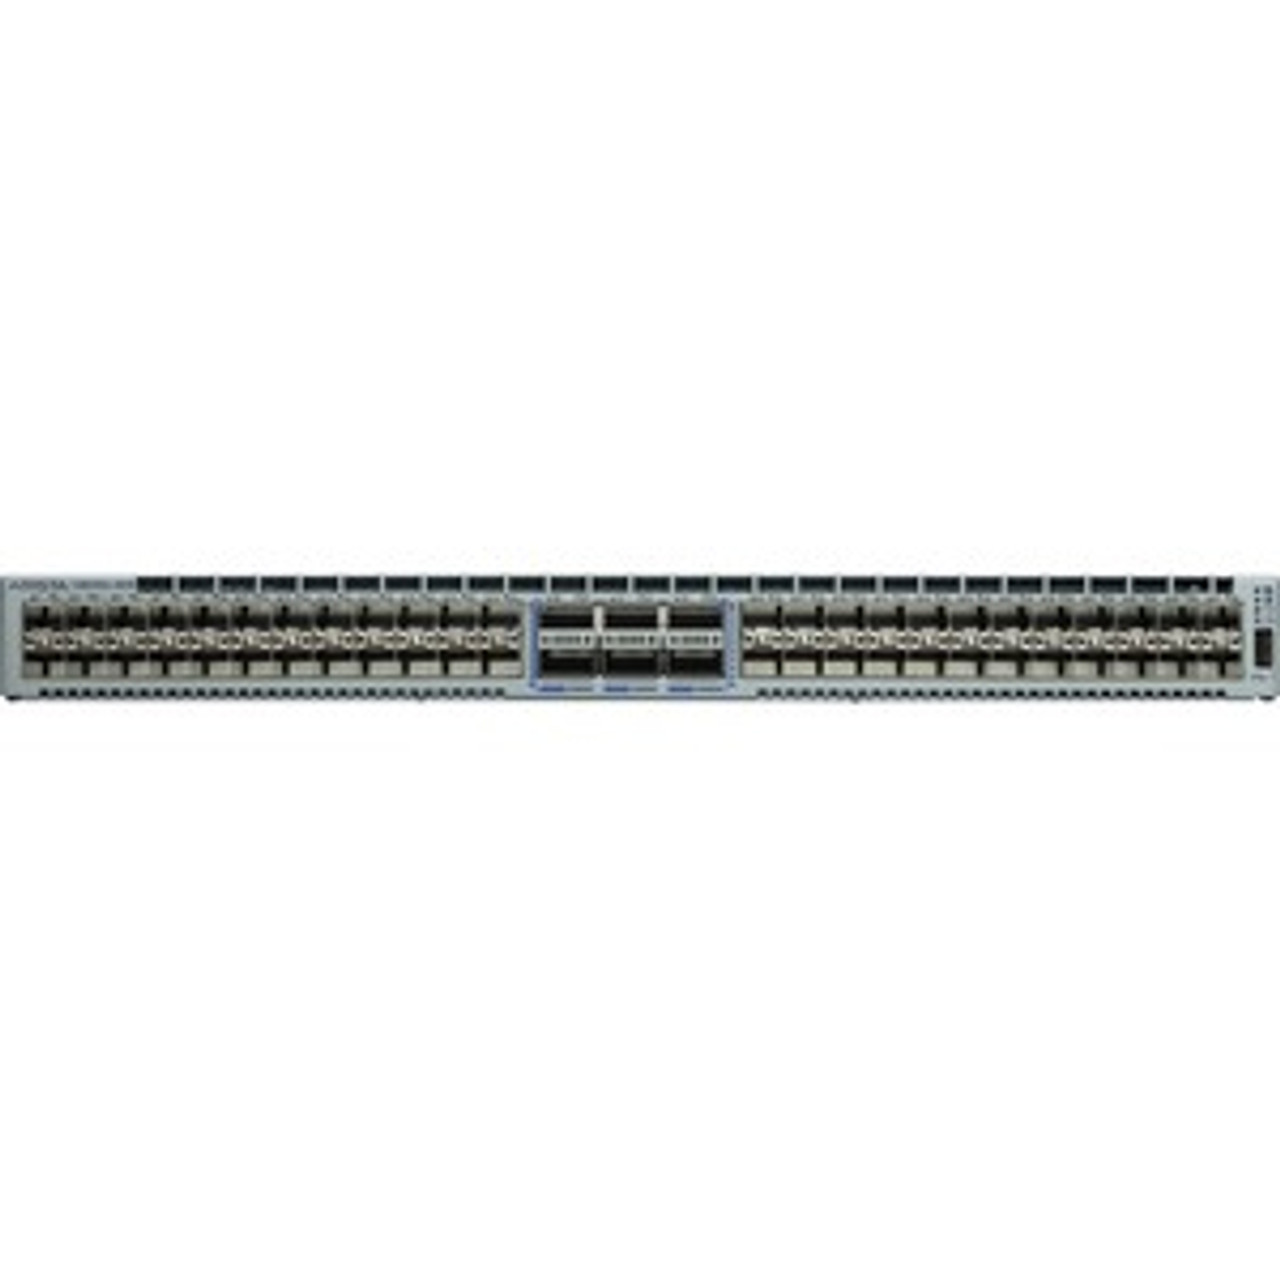 DCS-7280SR2A-48YC6MF Arista Networks 7280SR2A-48YC6 Layer 3 Switch - Manageable - 3 Layer Supported - Modular - 48 SFP Slots - Optical Fiber - 1U High -  (Refurbished)